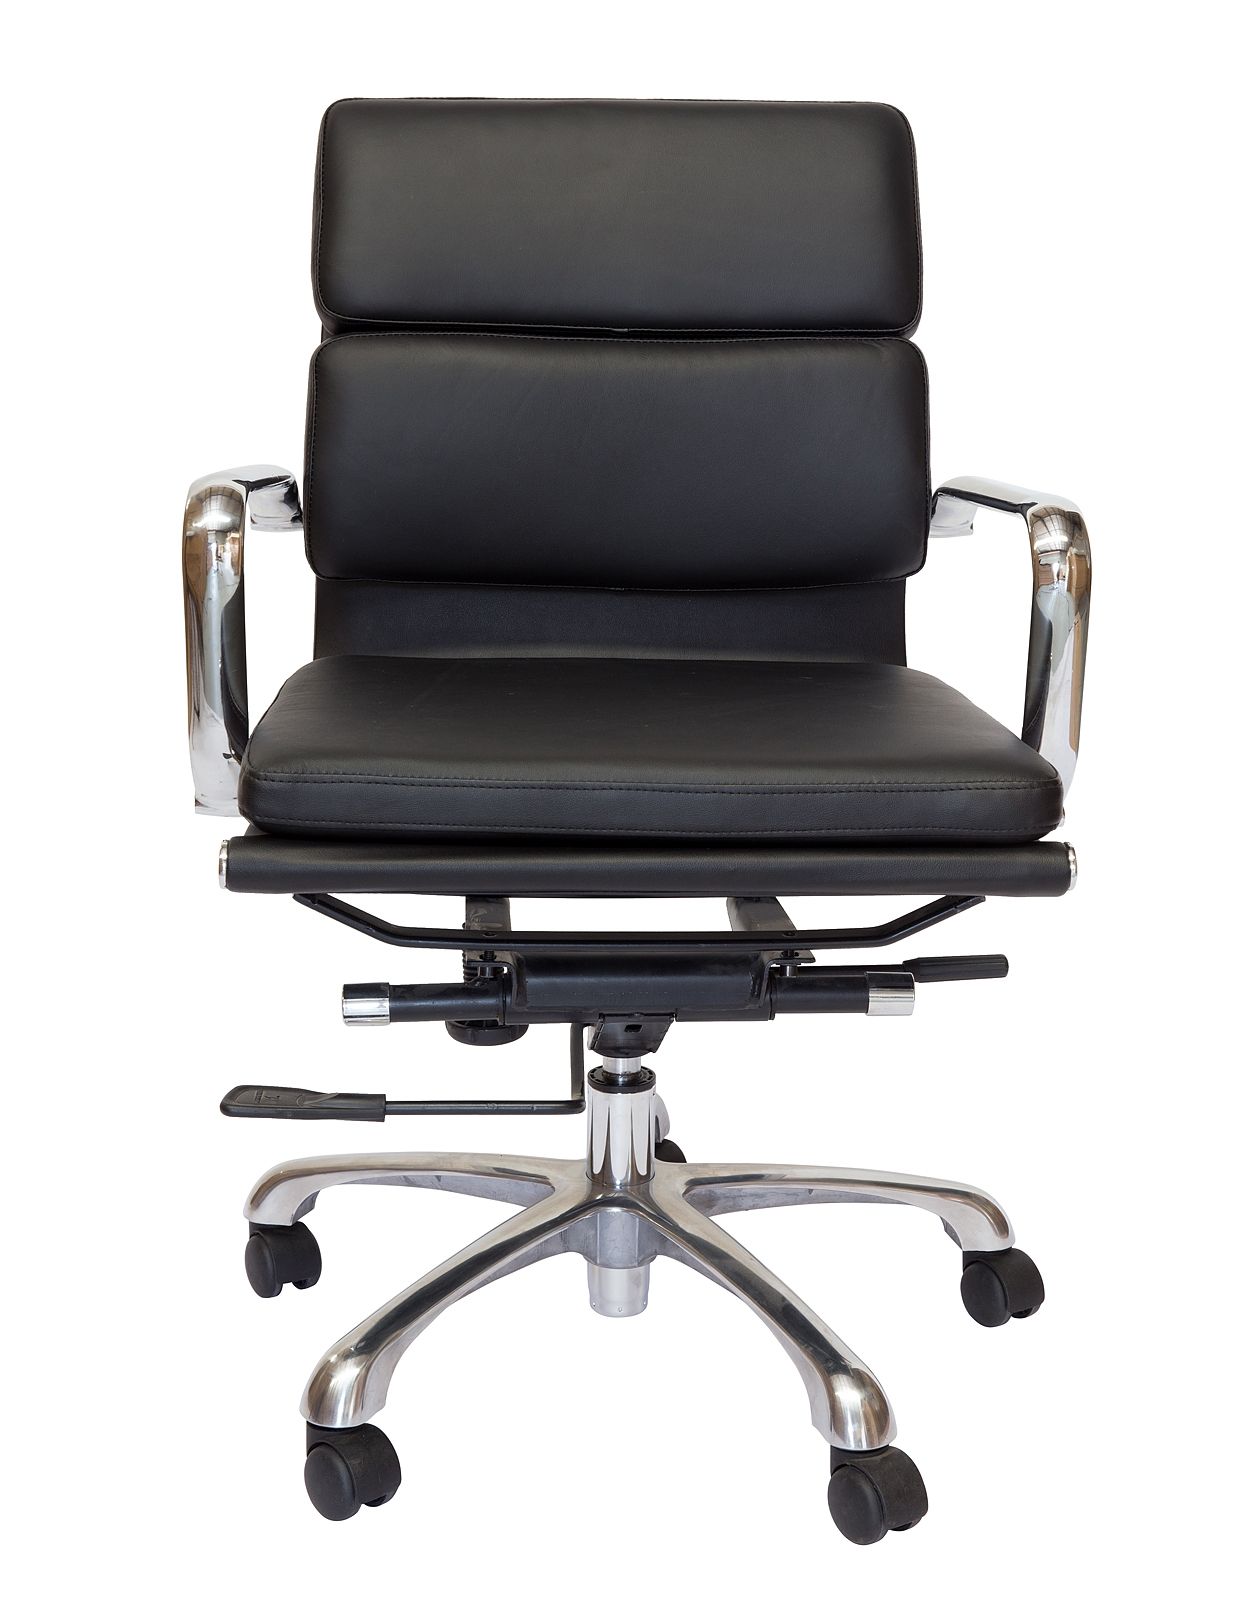 Eames Inspired Mid Back Soft Pad Management Desk / Office Chair | Black